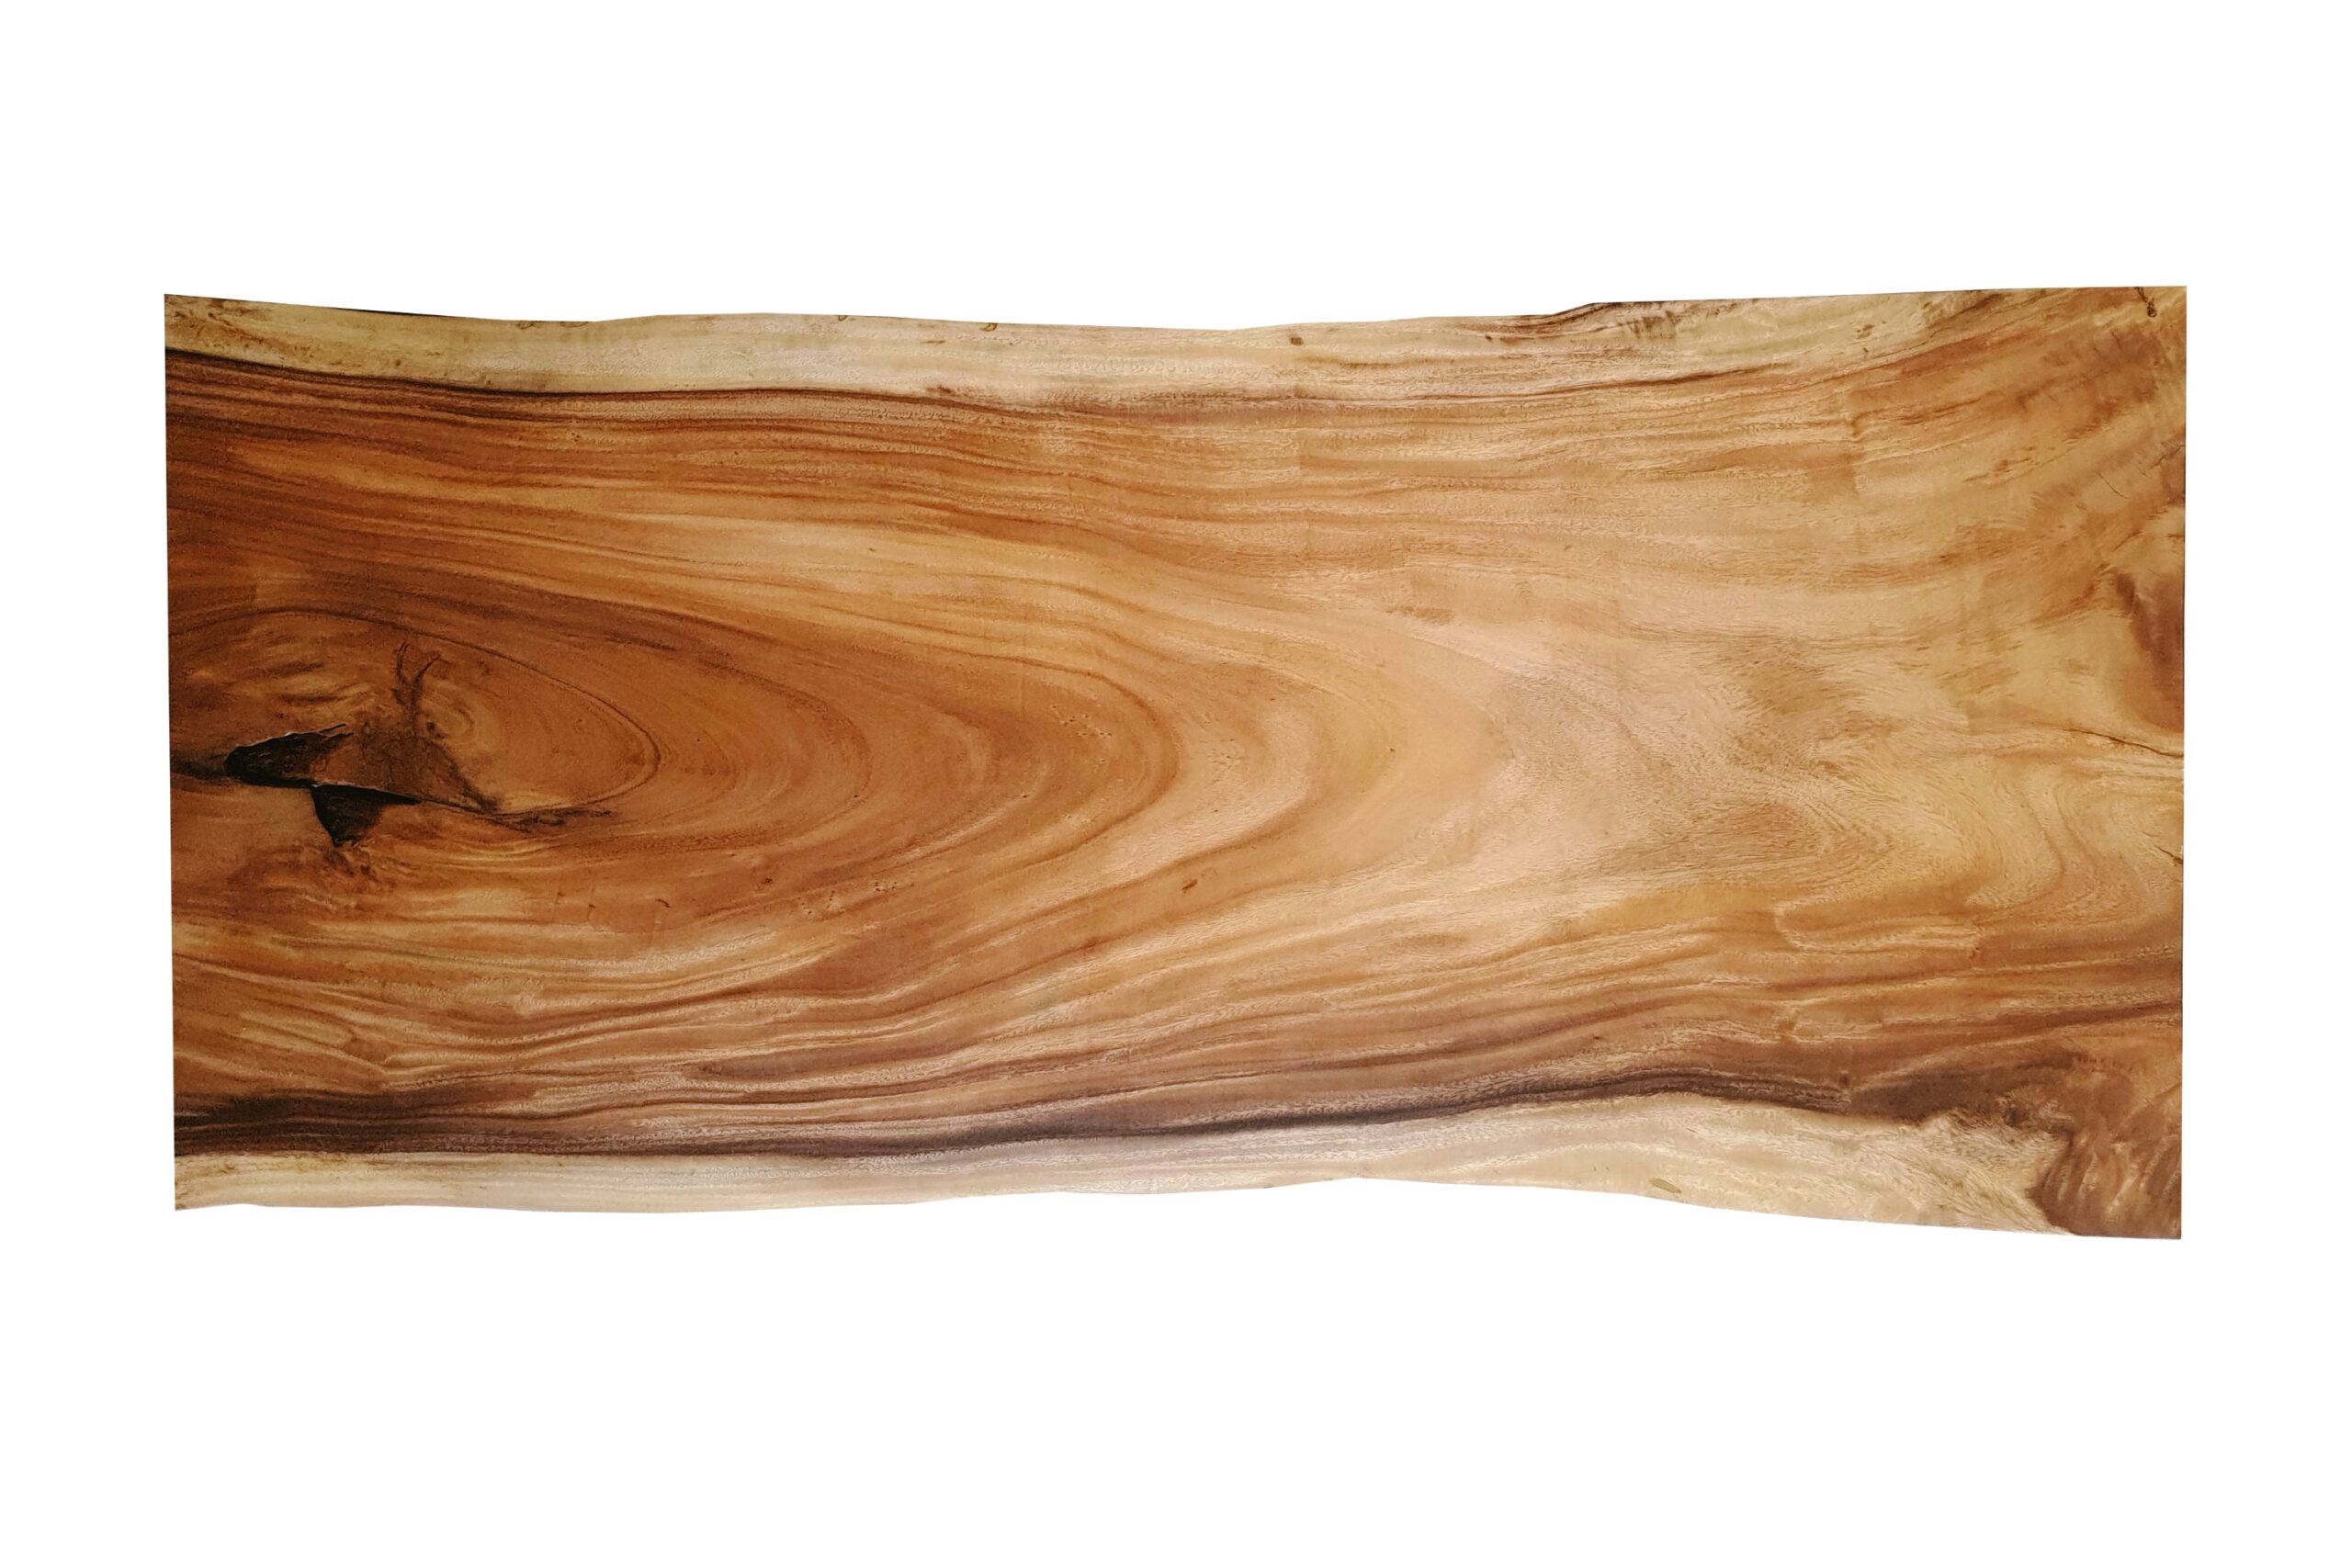 Buy Acacia Wood Live Edge Dining Table 79 x 36 − 40 x 2 Inches with ...